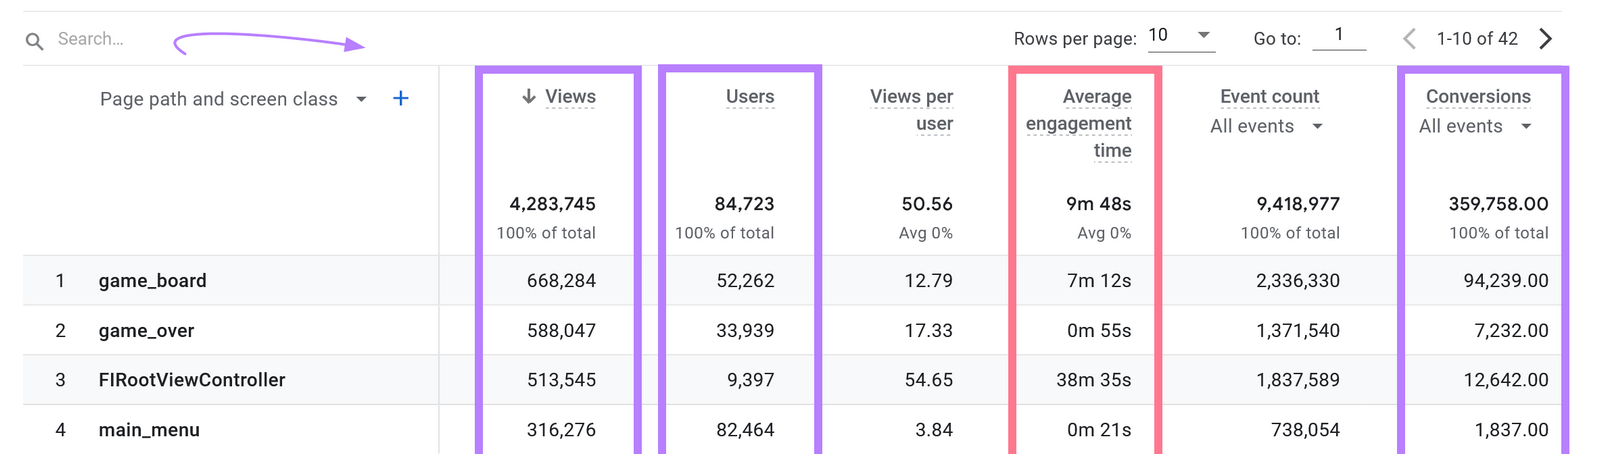 Pages and screens report showing number of views, conversions, and average engagement time for content.